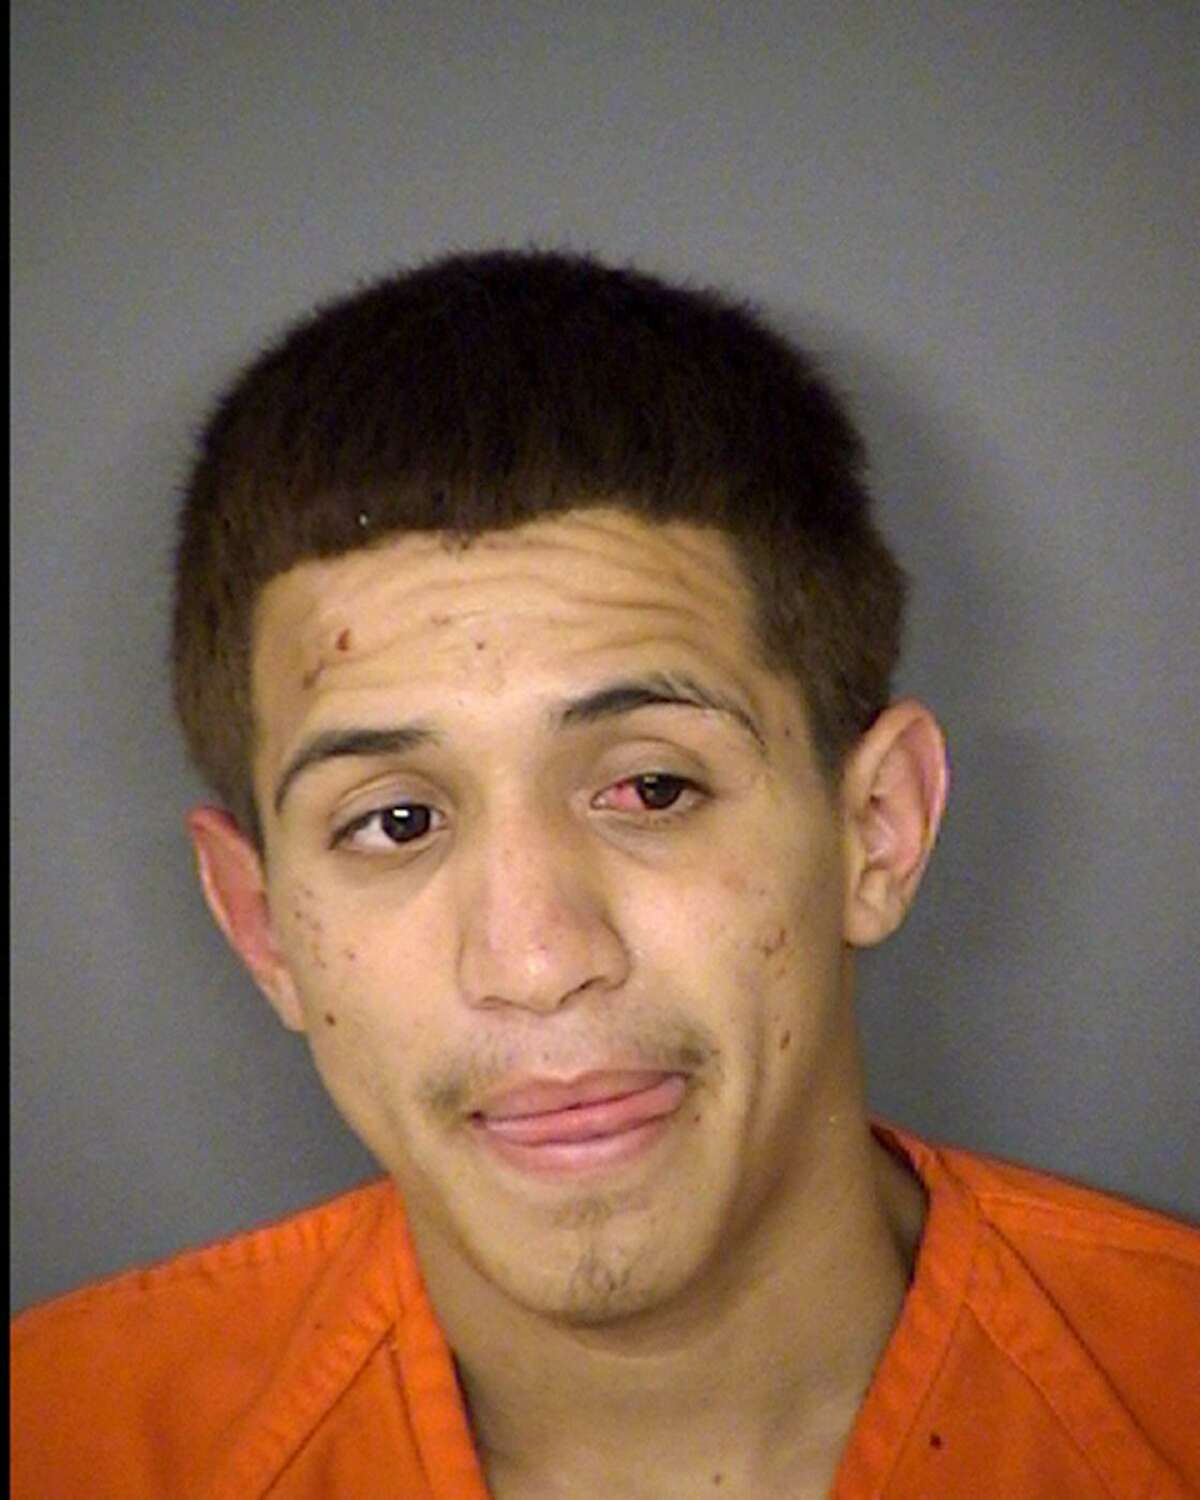 Gerardo Raul Rodriguez, 20, who was sentenced Friday to 30 years in prison for aggravated assault with a deadly weapon in the death of Richard Chapa, 38. The charge was reduced from capital murder as part of a plea agreement.